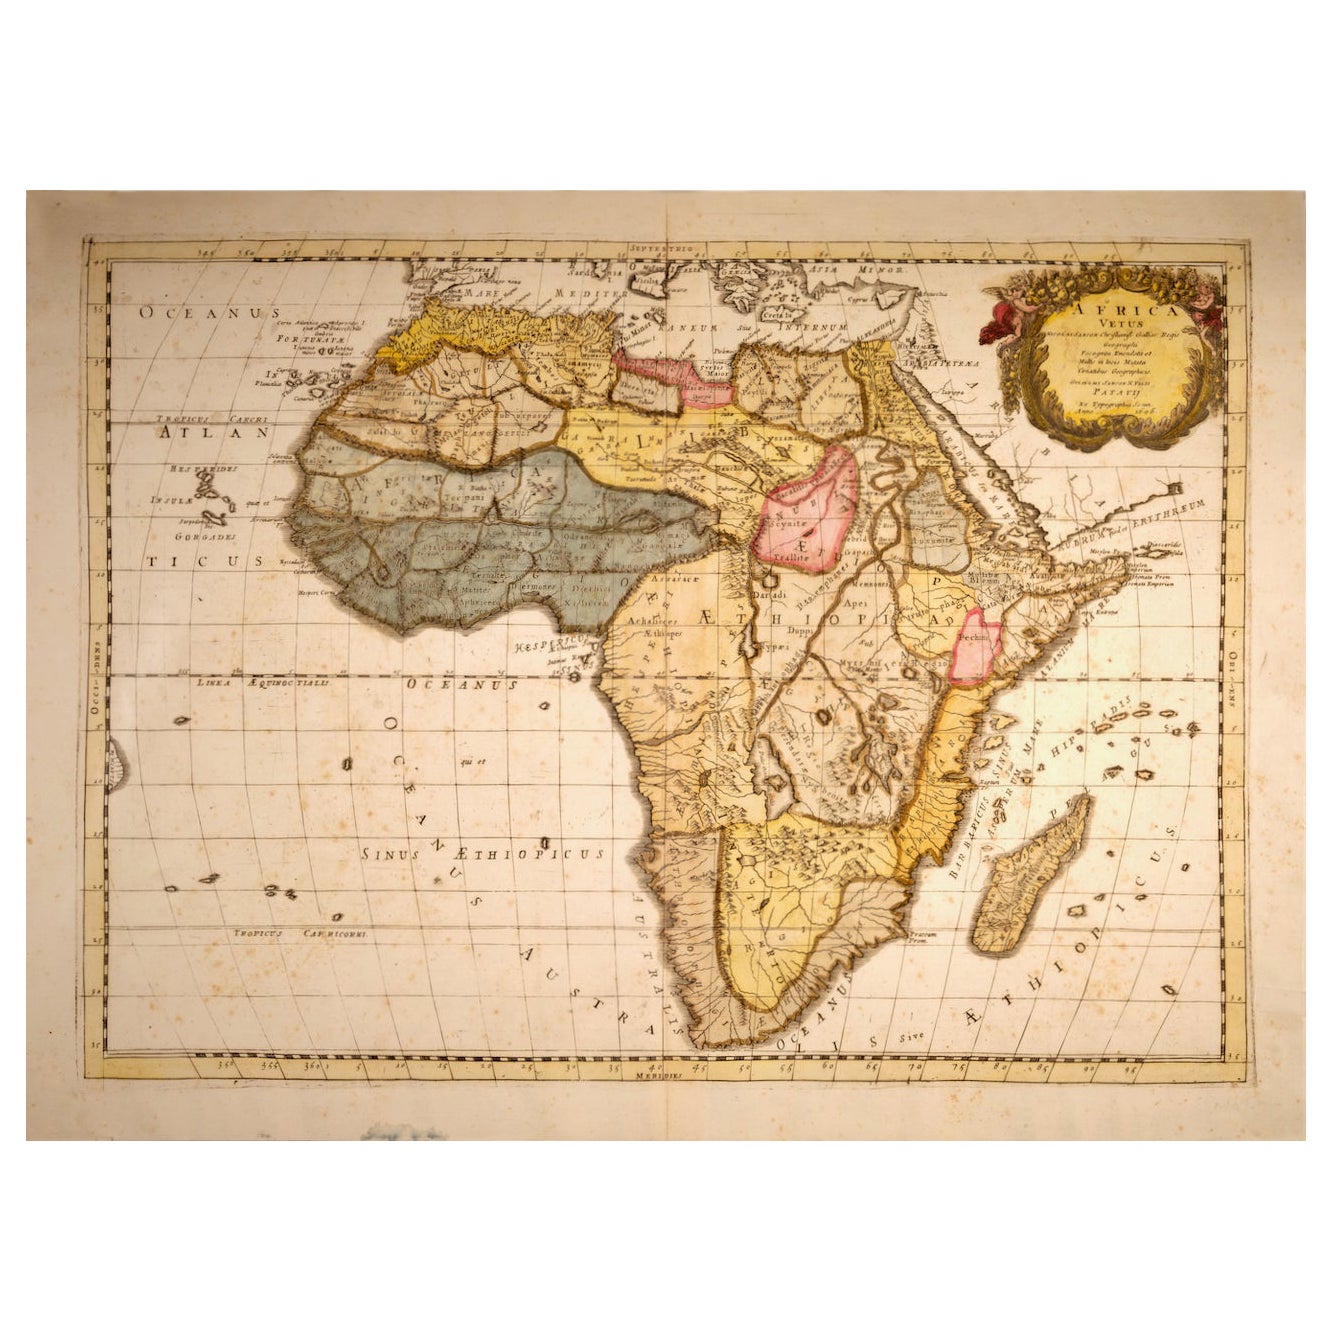 "Africa Vetus": a 17th Century Hand-Colored Map by Sanson